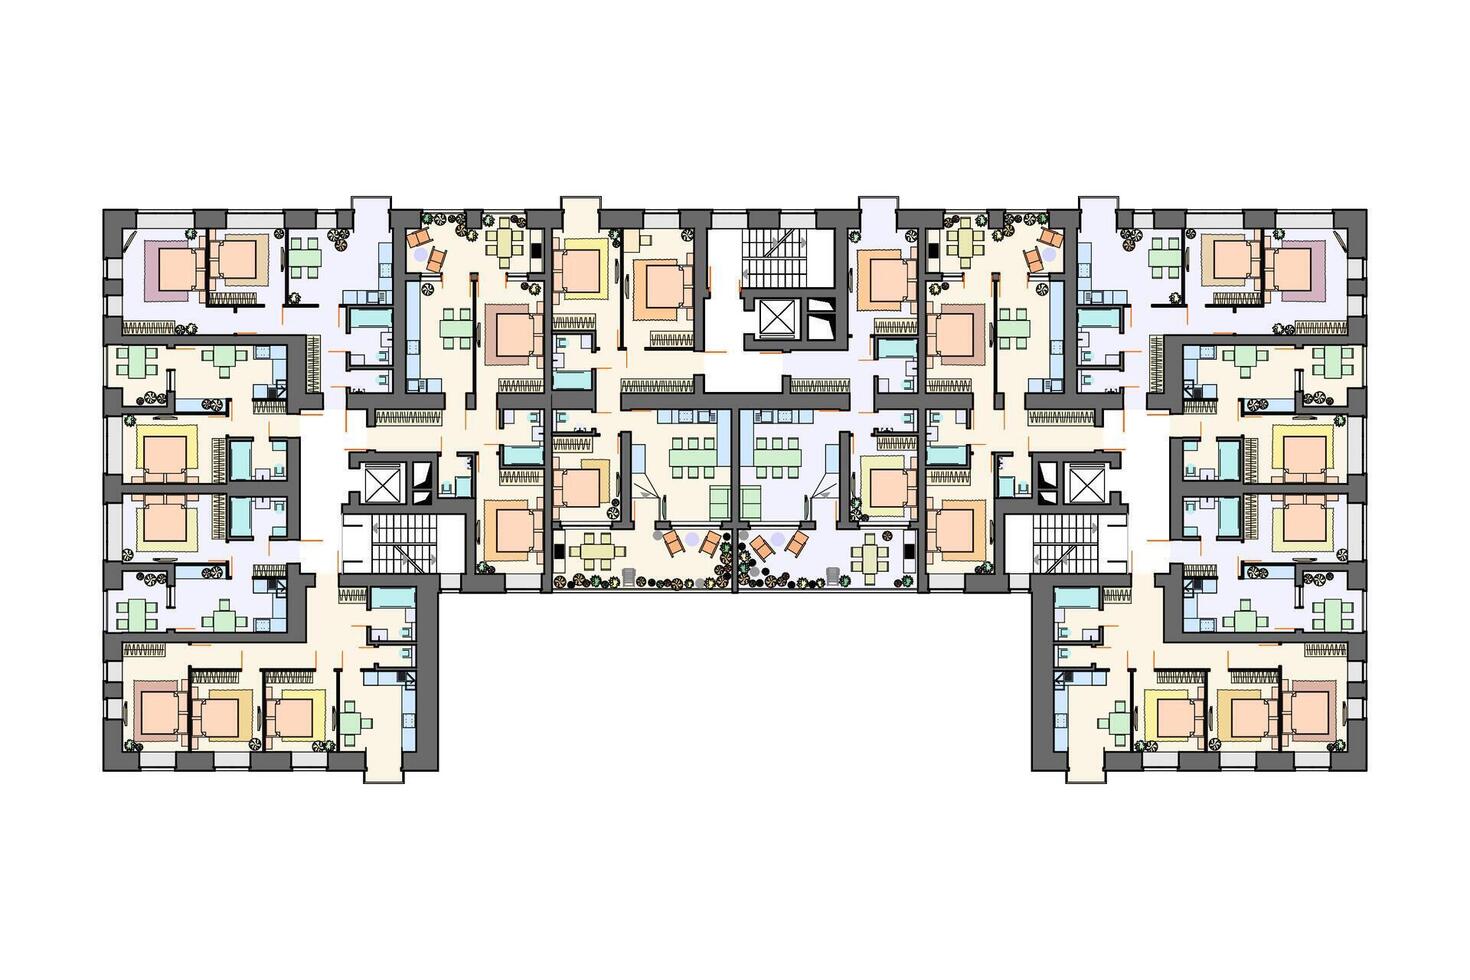 Detailed architectural multistory  building floor plan, apartment layout, blueprint. Vector illustration